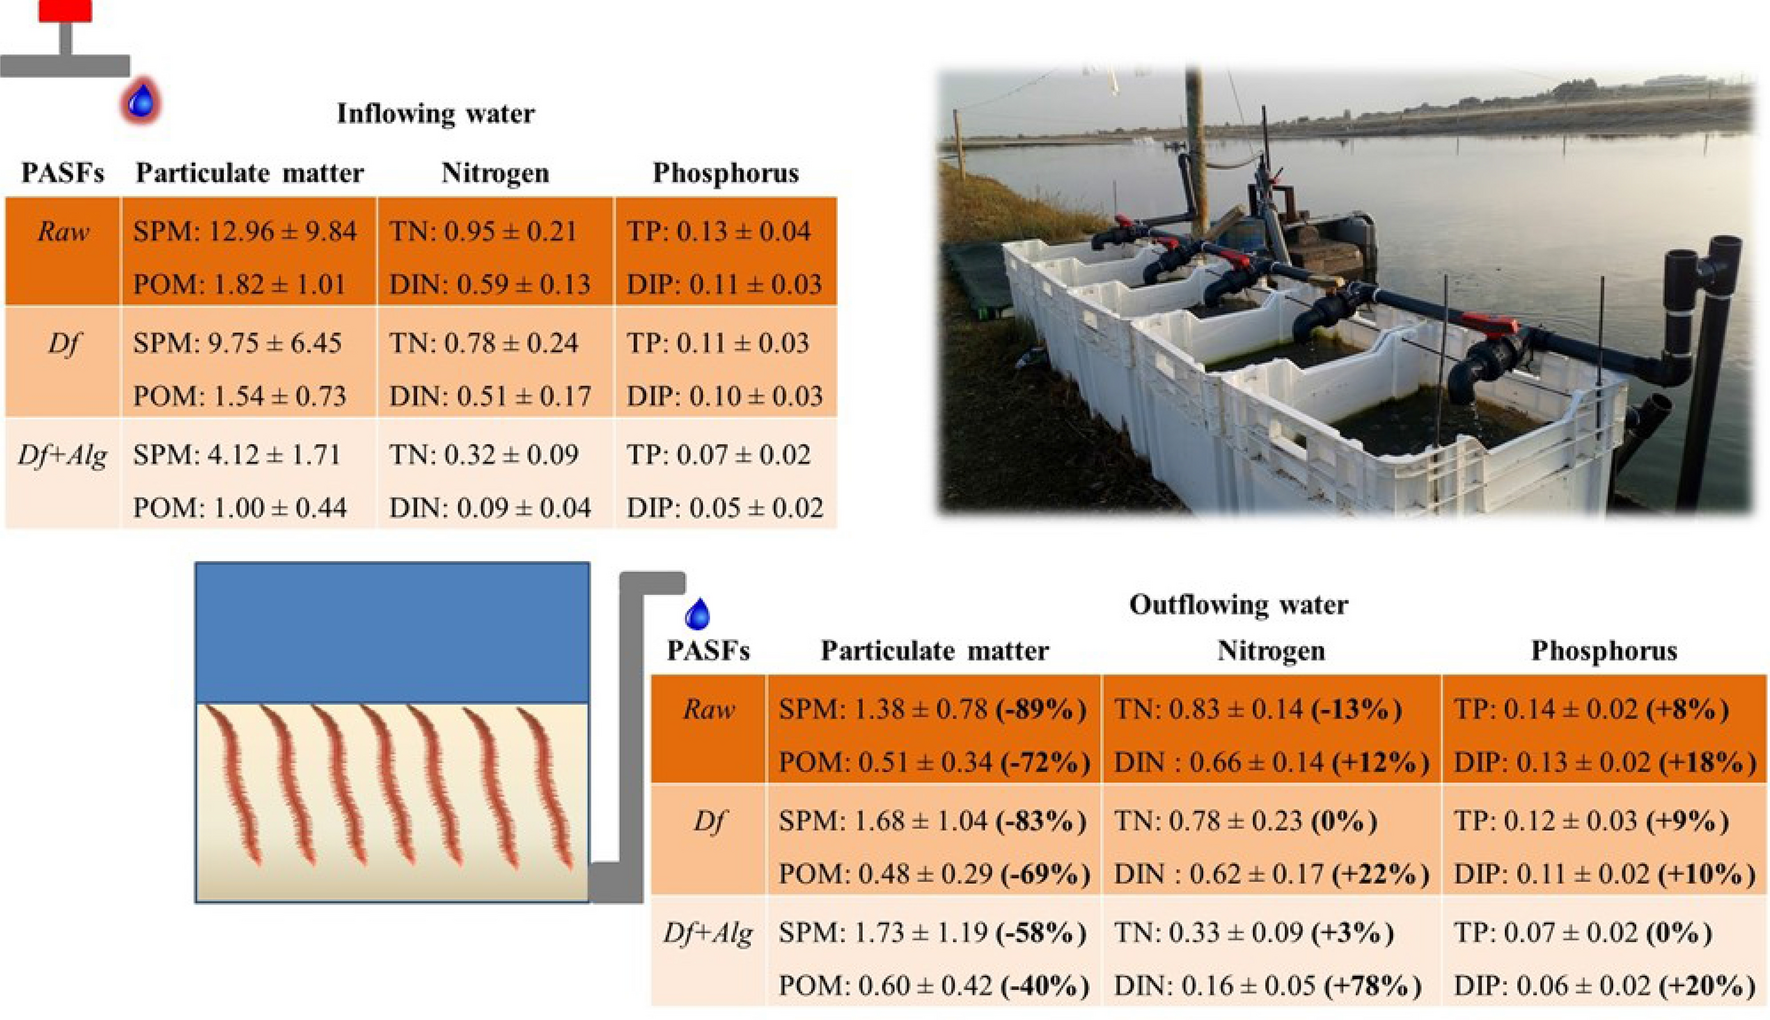 Tøm skraldespanden Temerity Marty Fielding Performance of polychaete assisted sand filters under contrasting nutrient  loads in an integrated multi-trophic aquaculture (IMTA) system | Scientific  Reports